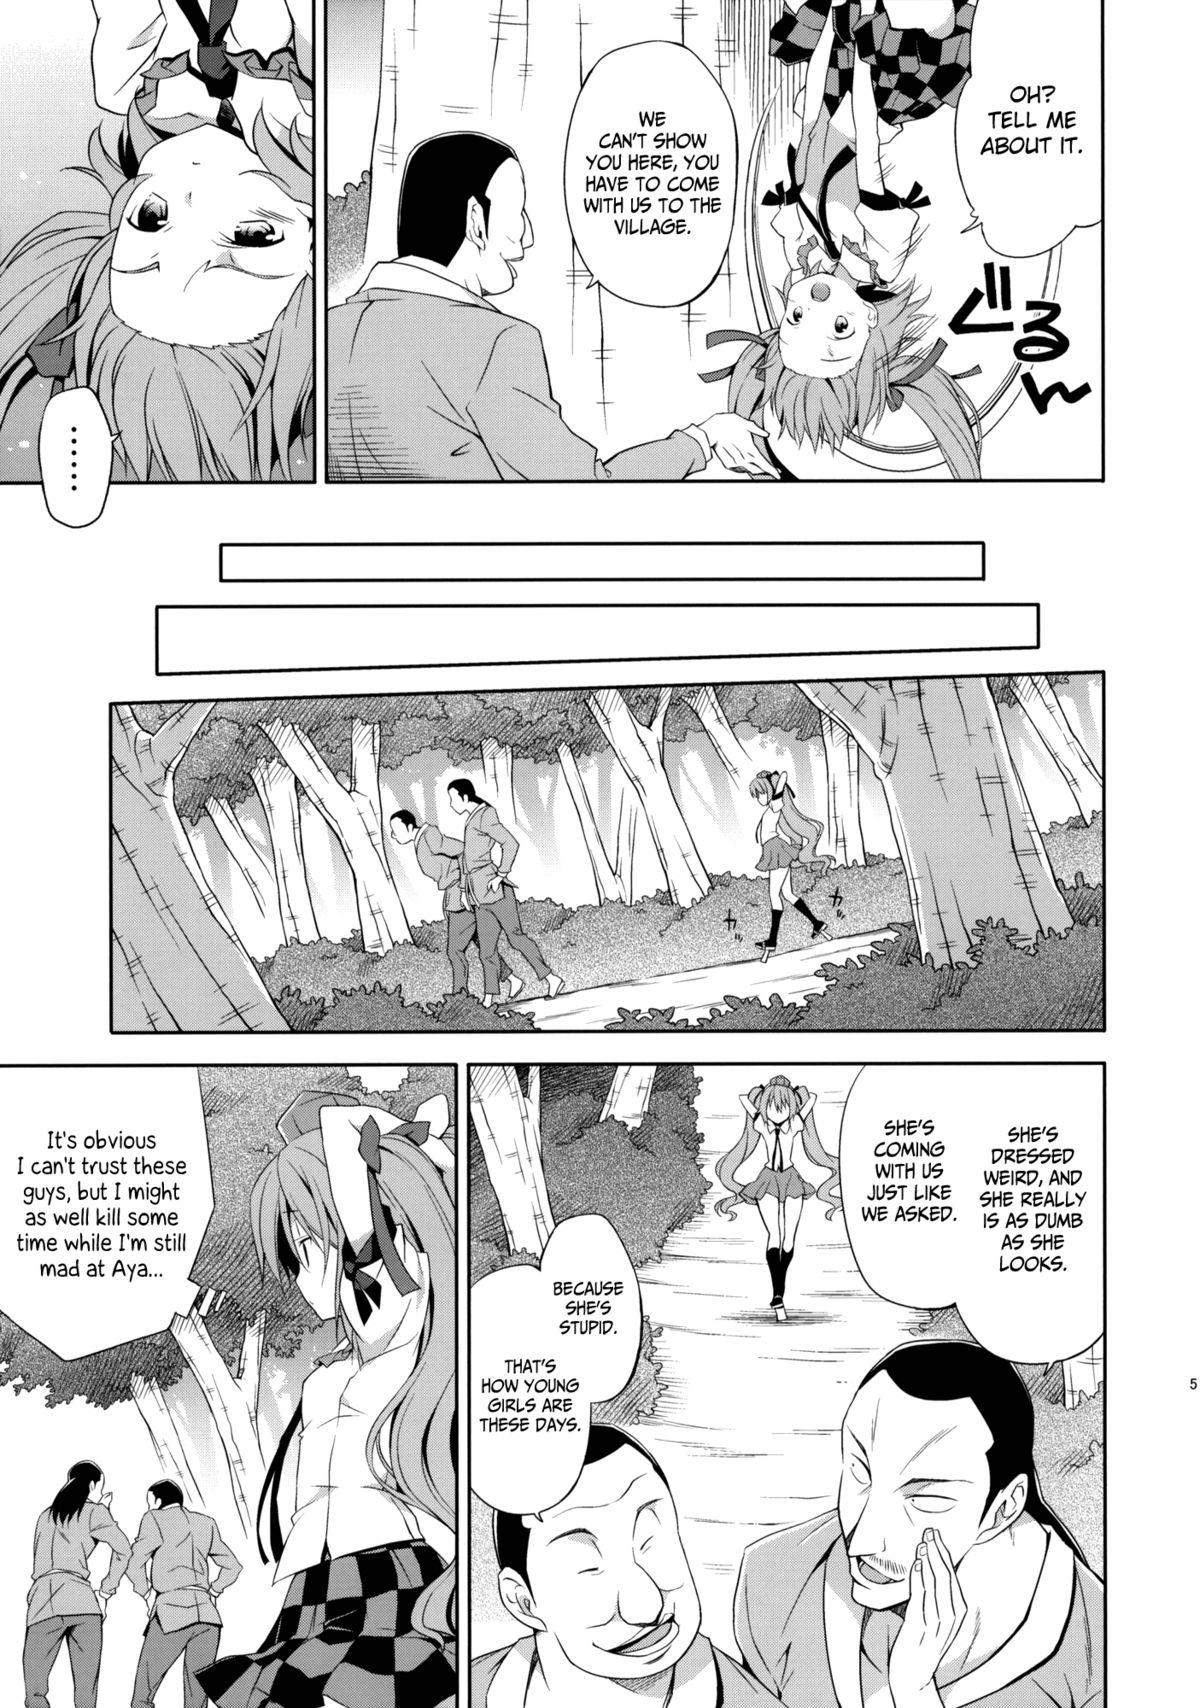 Ametur Porn Hatate no Binwan Shuzairoku | Record of Hatate's Competent Fact-Finding - Touhou project Interracial Sex - Page 4